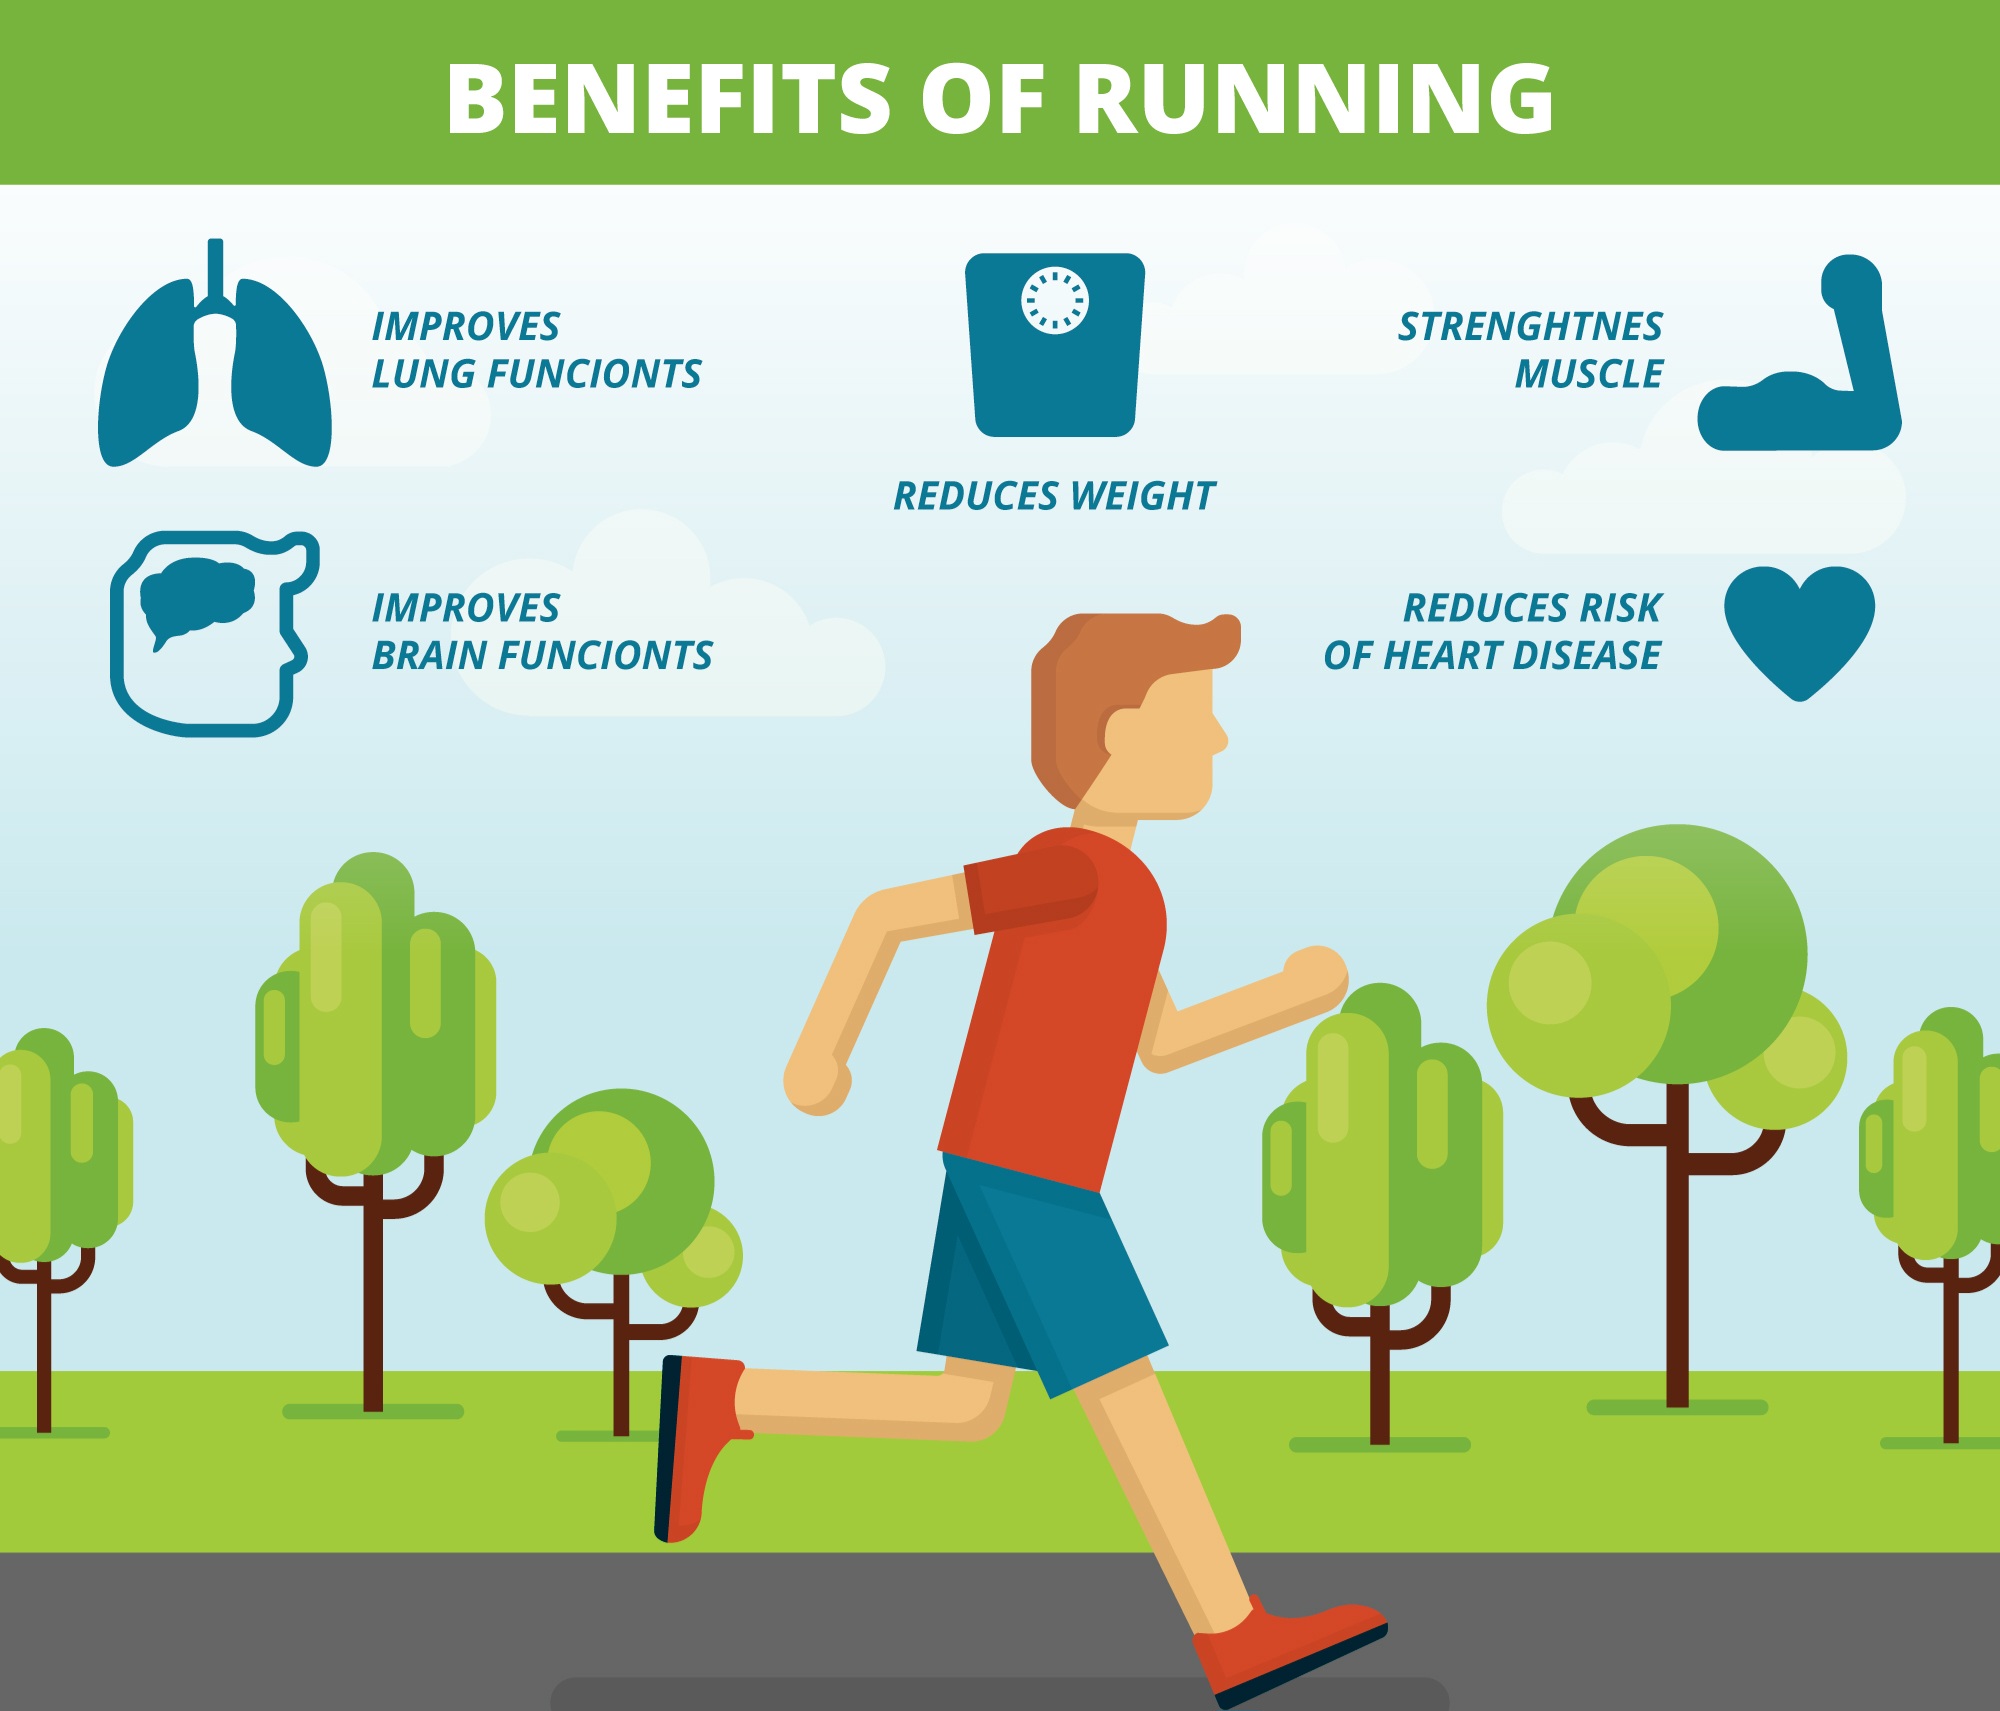 Daily Running: Benefits and Risks